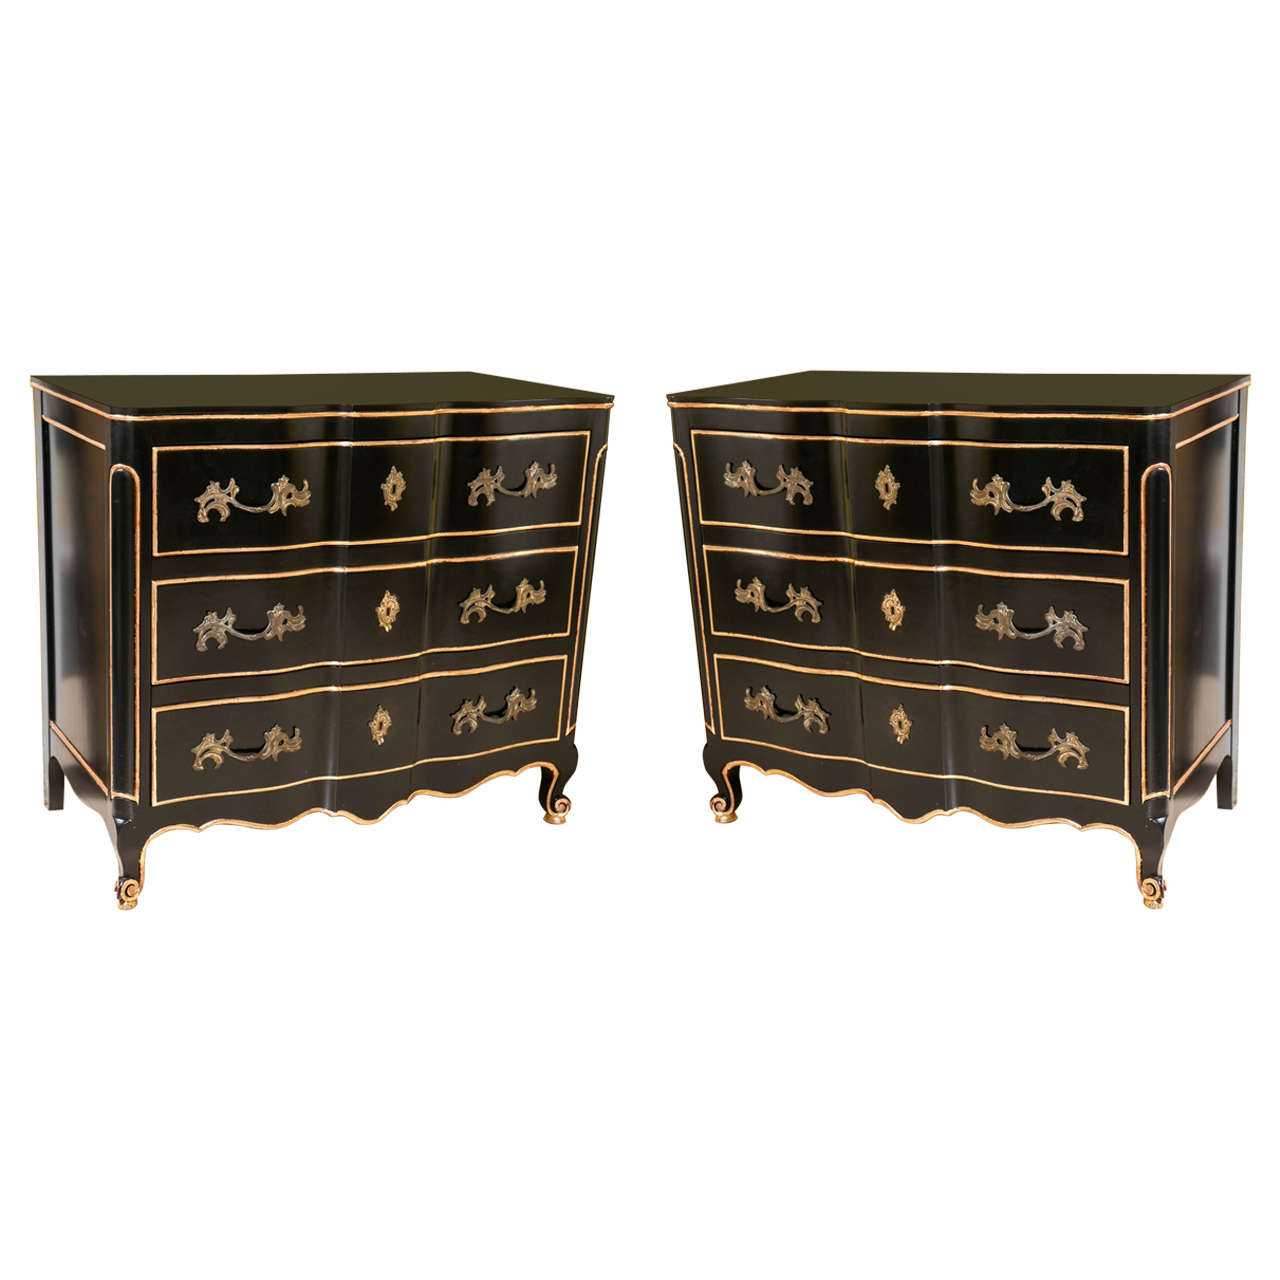 Pair of Ebonized and Gilt Gold Louis XV Style Commode Chests